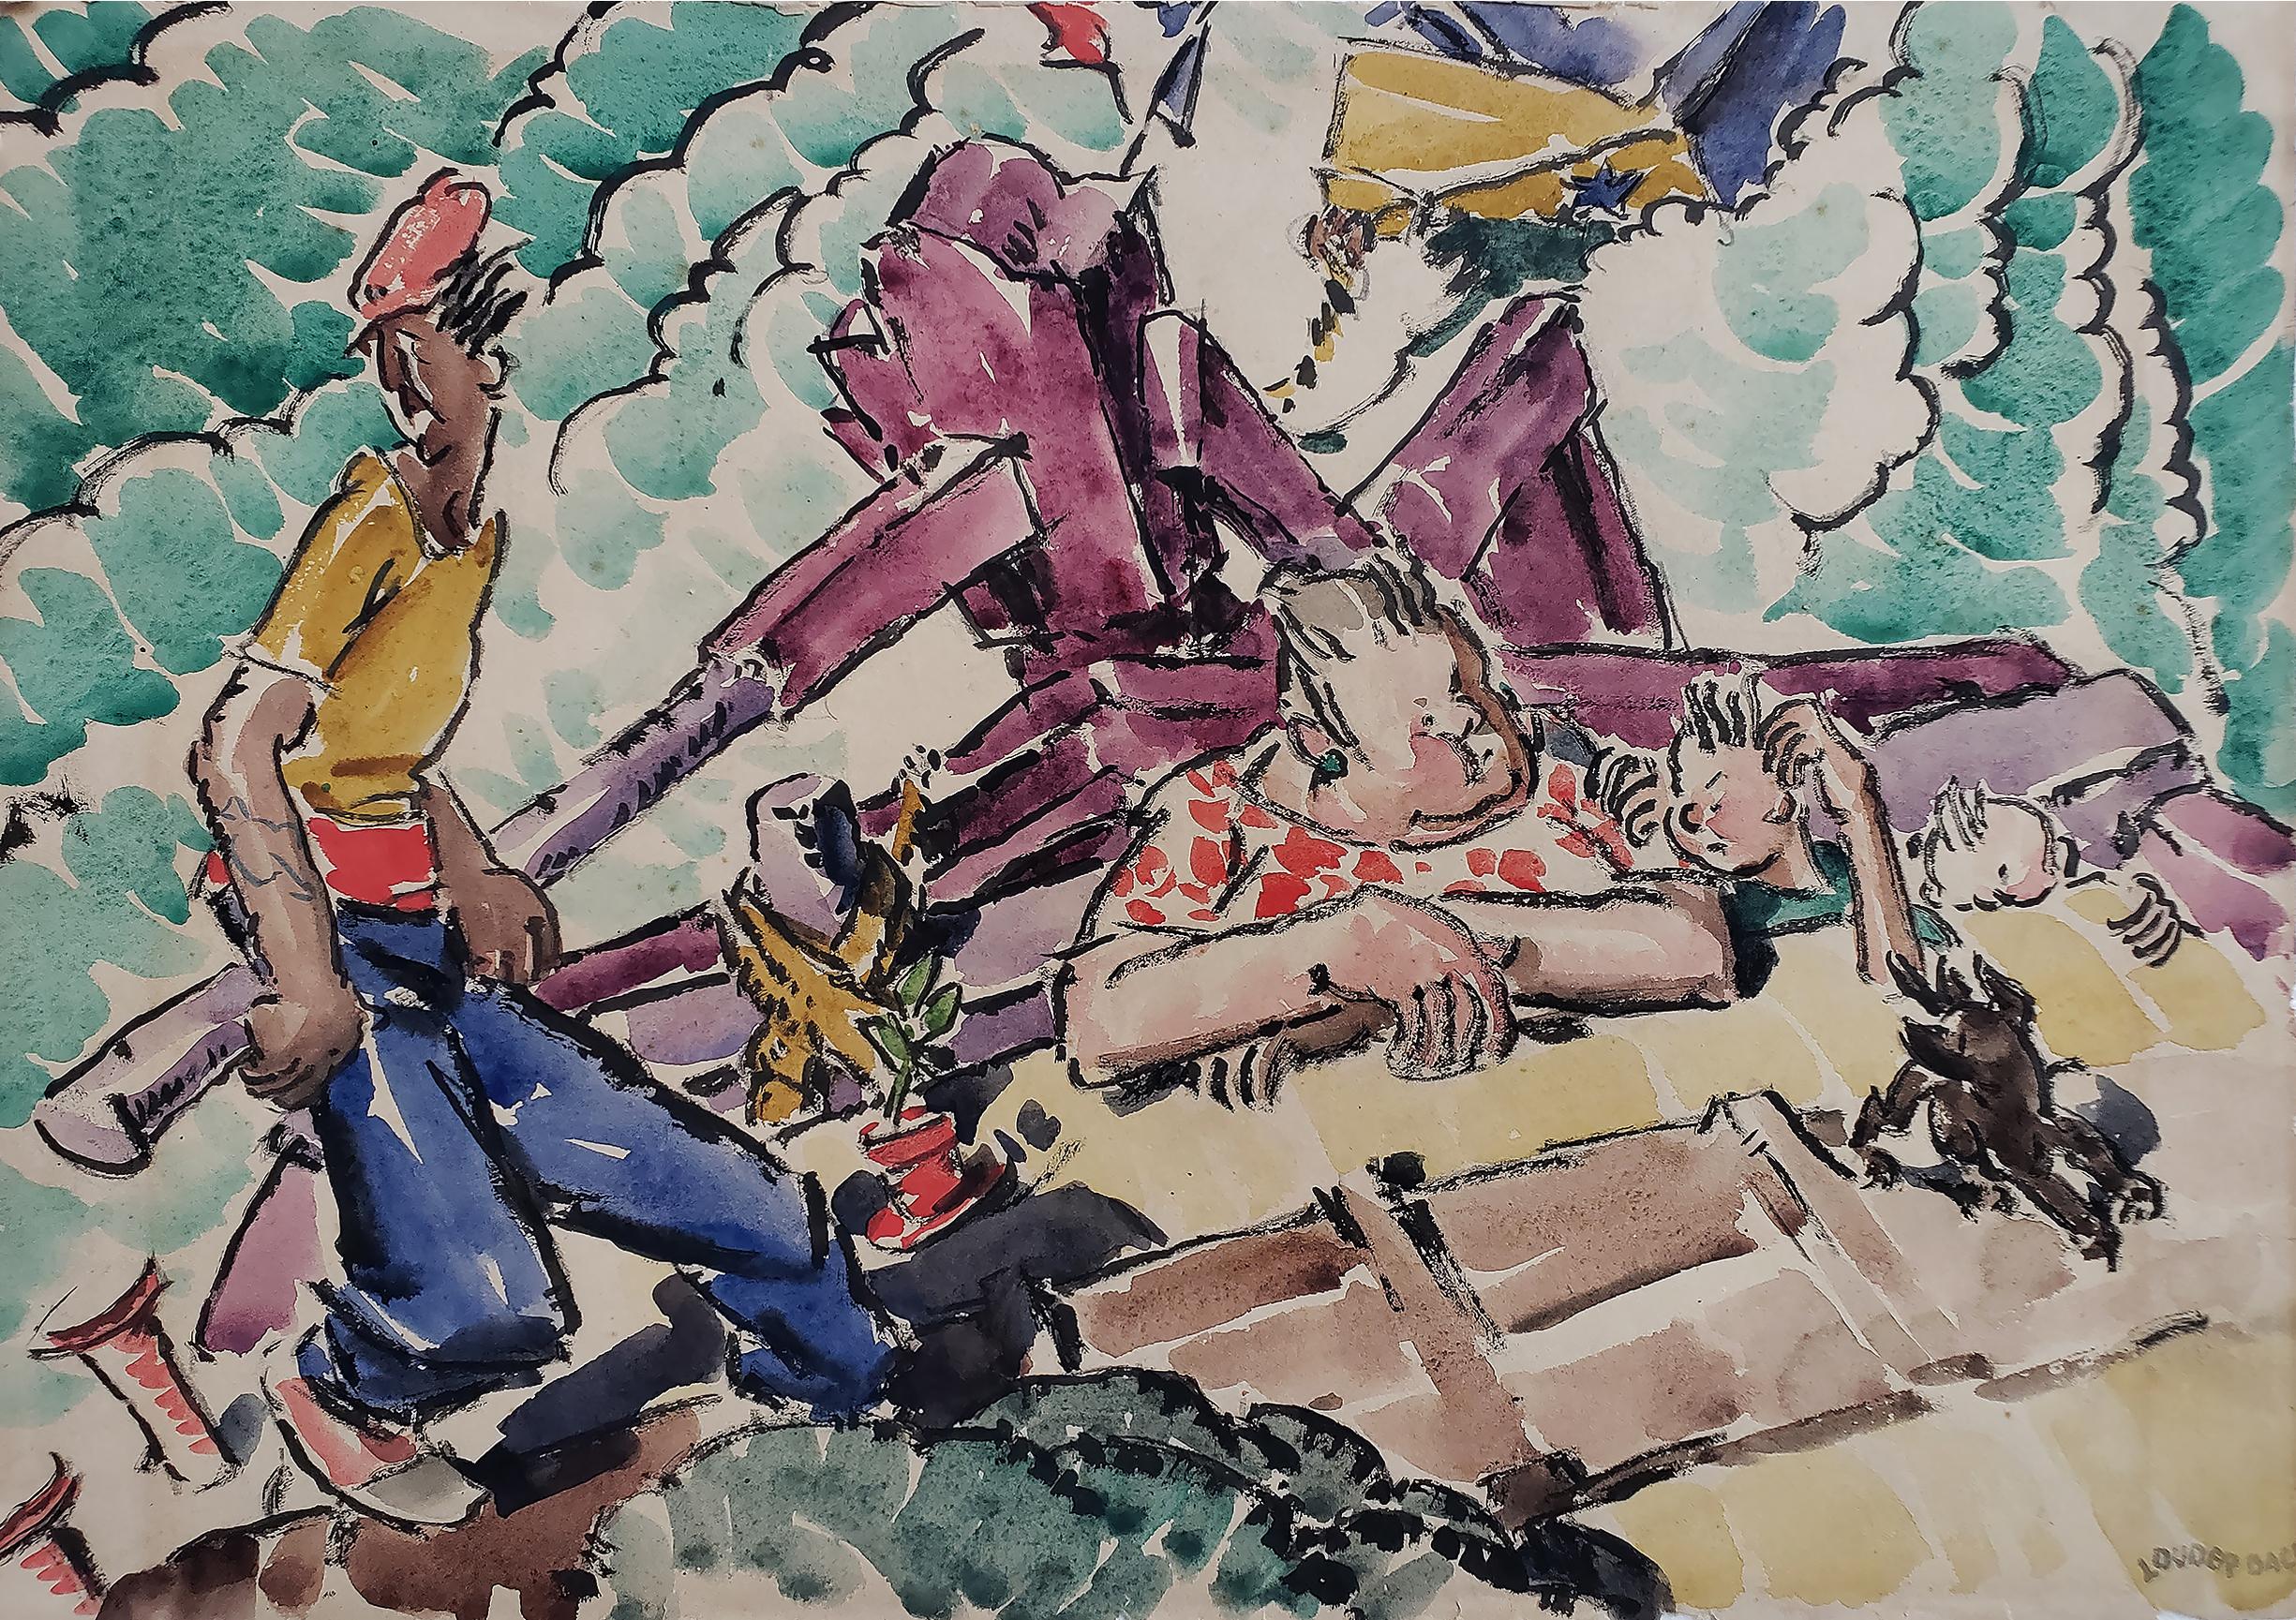 Fisherman and Family on Boat